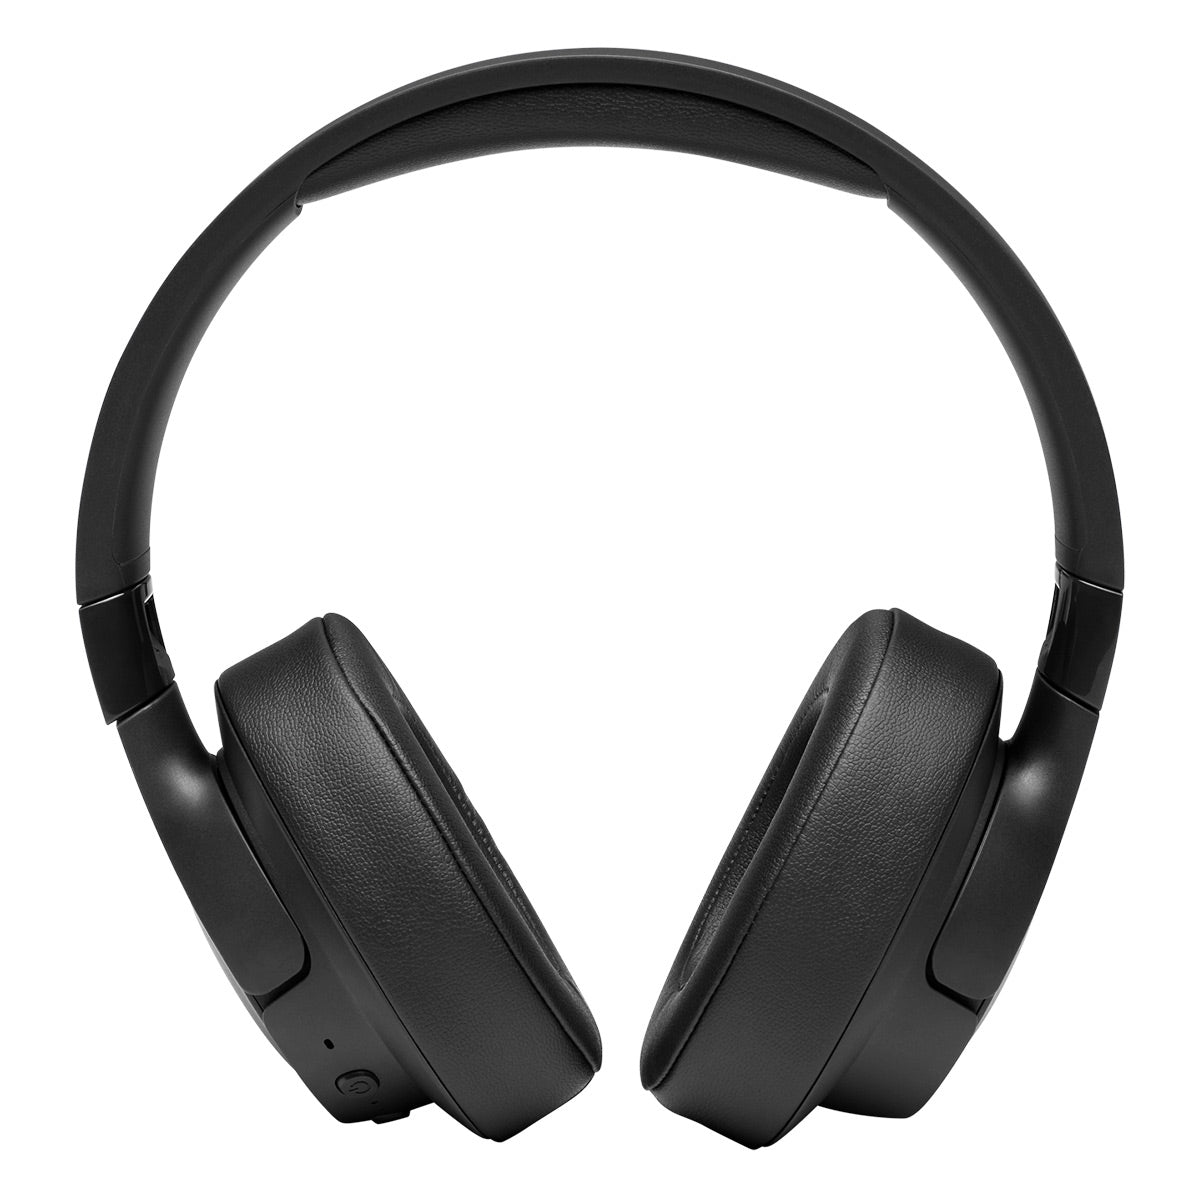 JBL Tune 760NC Wireless Over-Ear Active Noise Cancelling Headphones (Black)